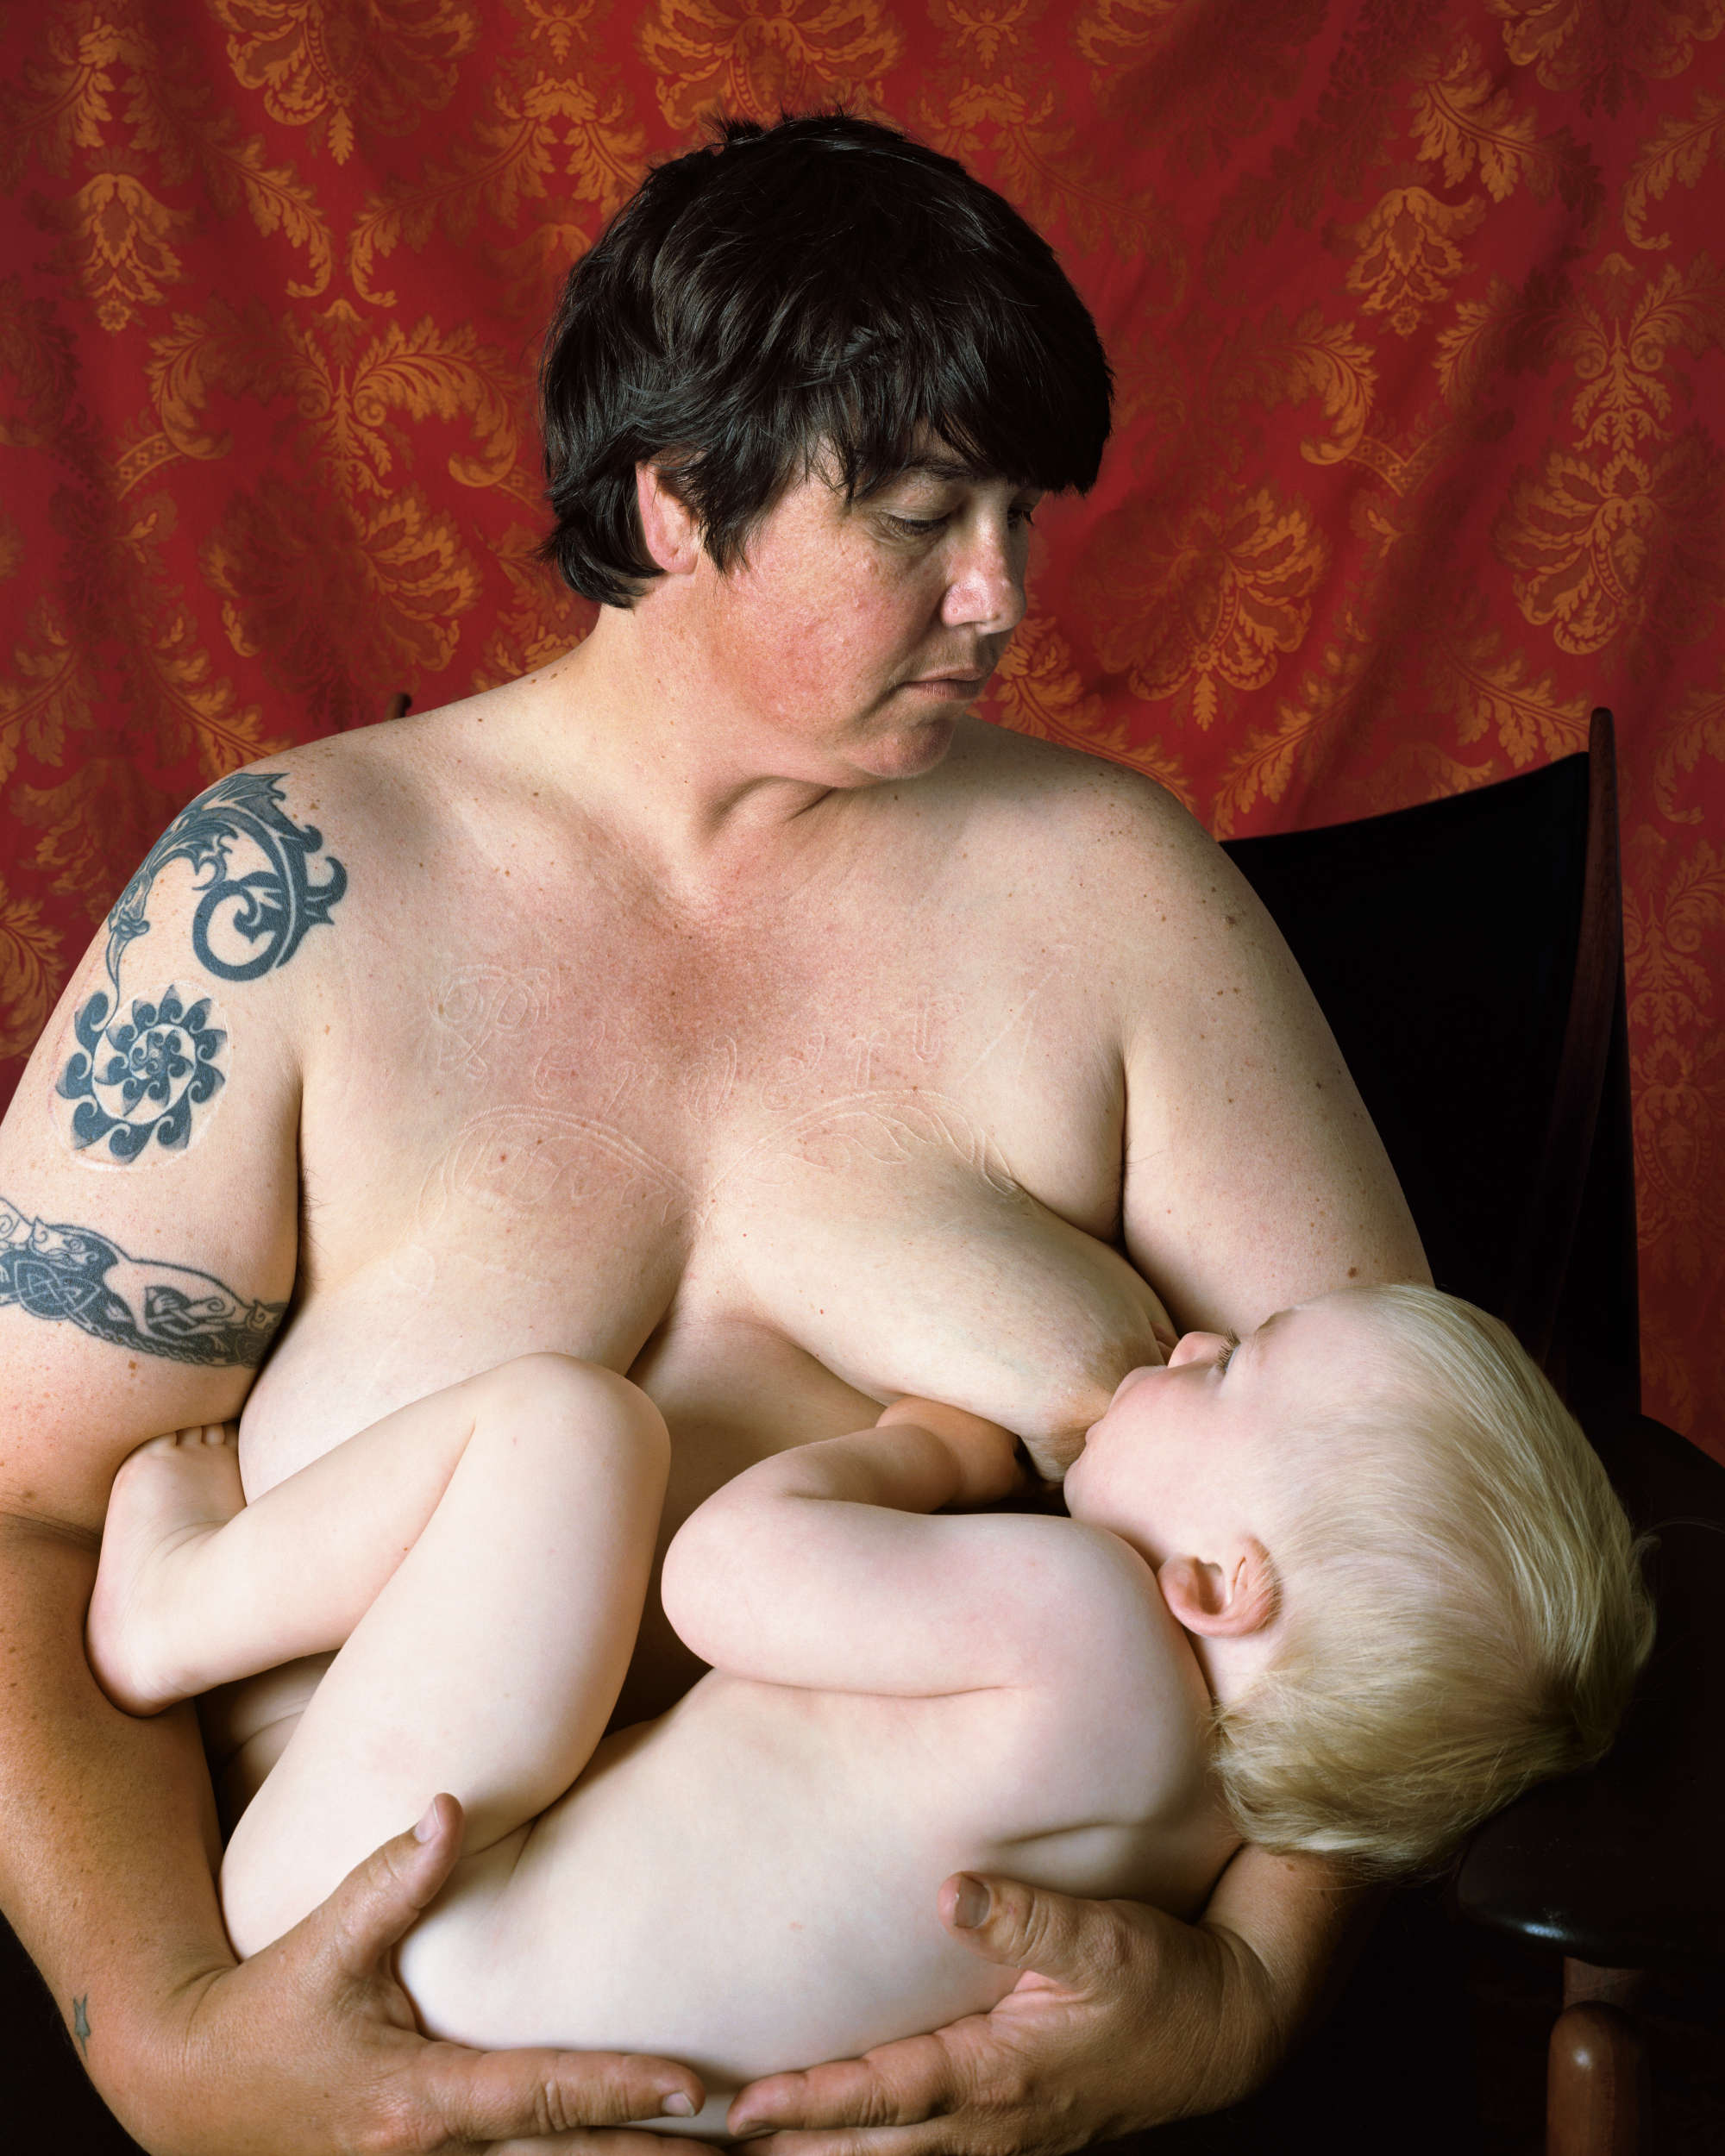 Self-Portrait/Nursing, 2004. Chromogenic print, 40 × 32 in. (101.6 × 81.3 cm). Picture credit: courtesy the artist and Regen Projects, Los Angeles; Lehmann Maupin, New York/Hong Kong/Seoul/London; Thomas Dane Gallery, London and Naples; and Peder Lund, Oslo. Self-Portraits (1970–ongoing)